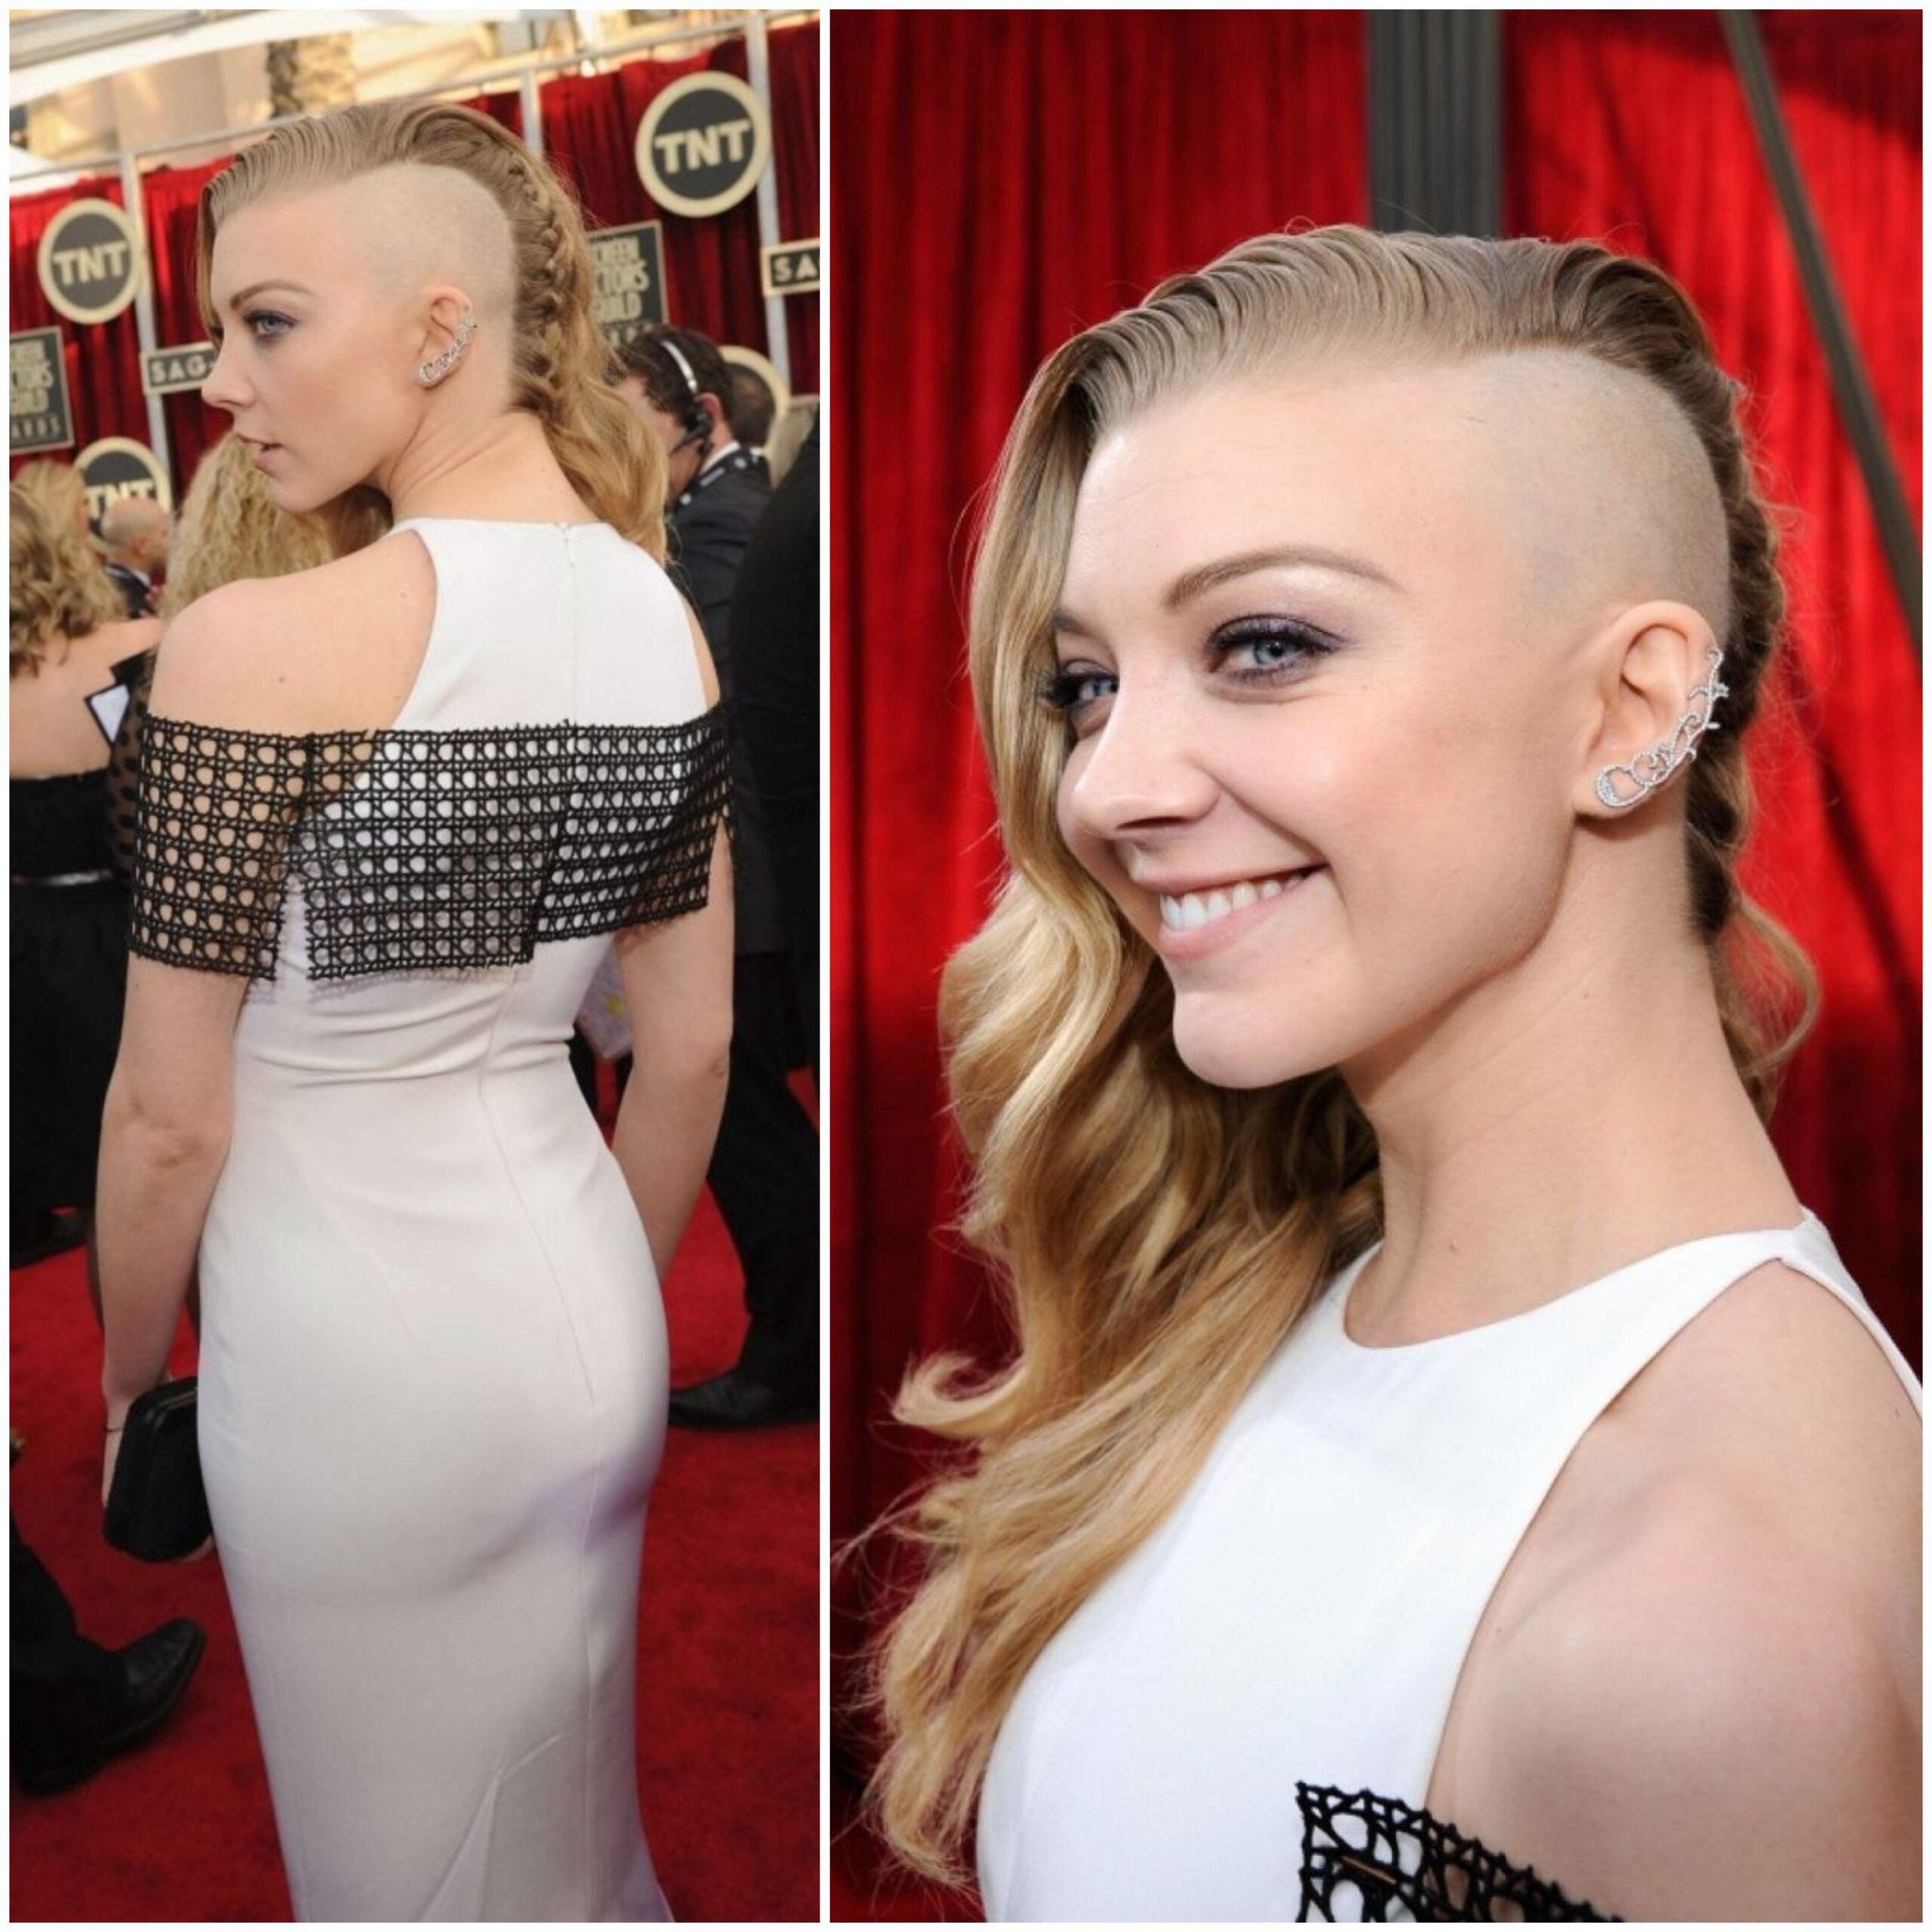 Natalie Dormer has never looked better than in this outfit